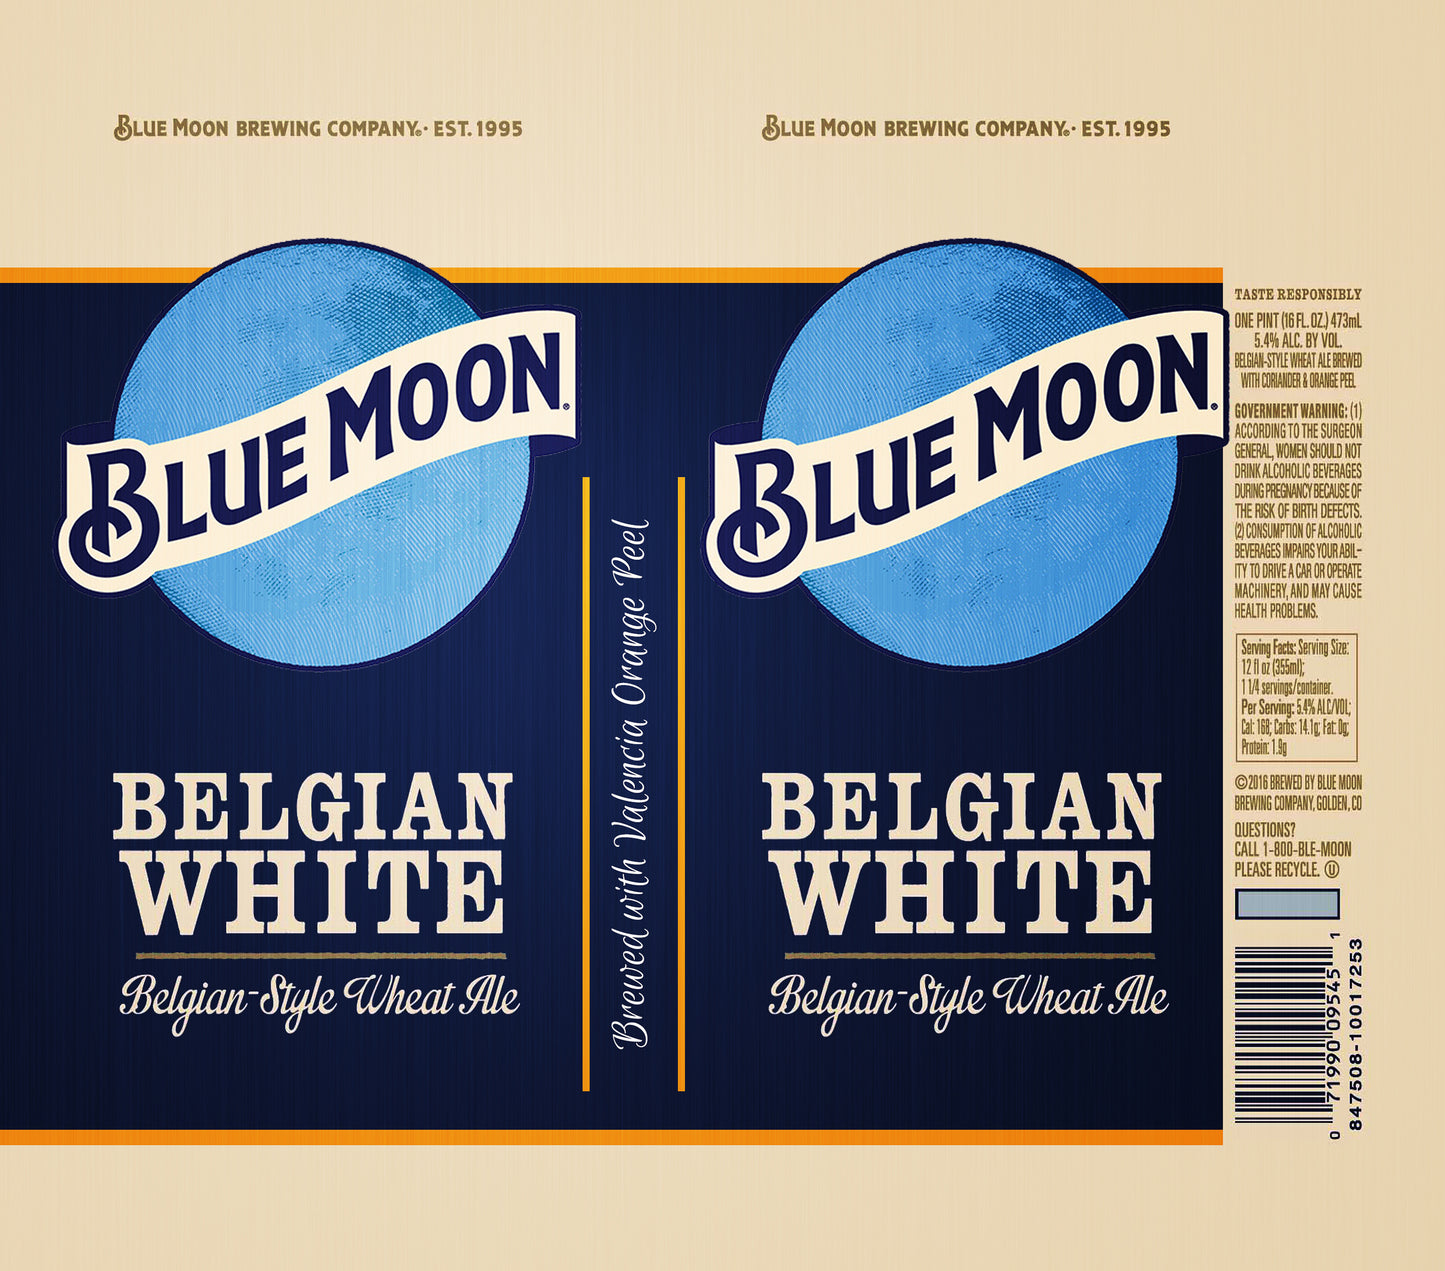 BLUE MOON CAN